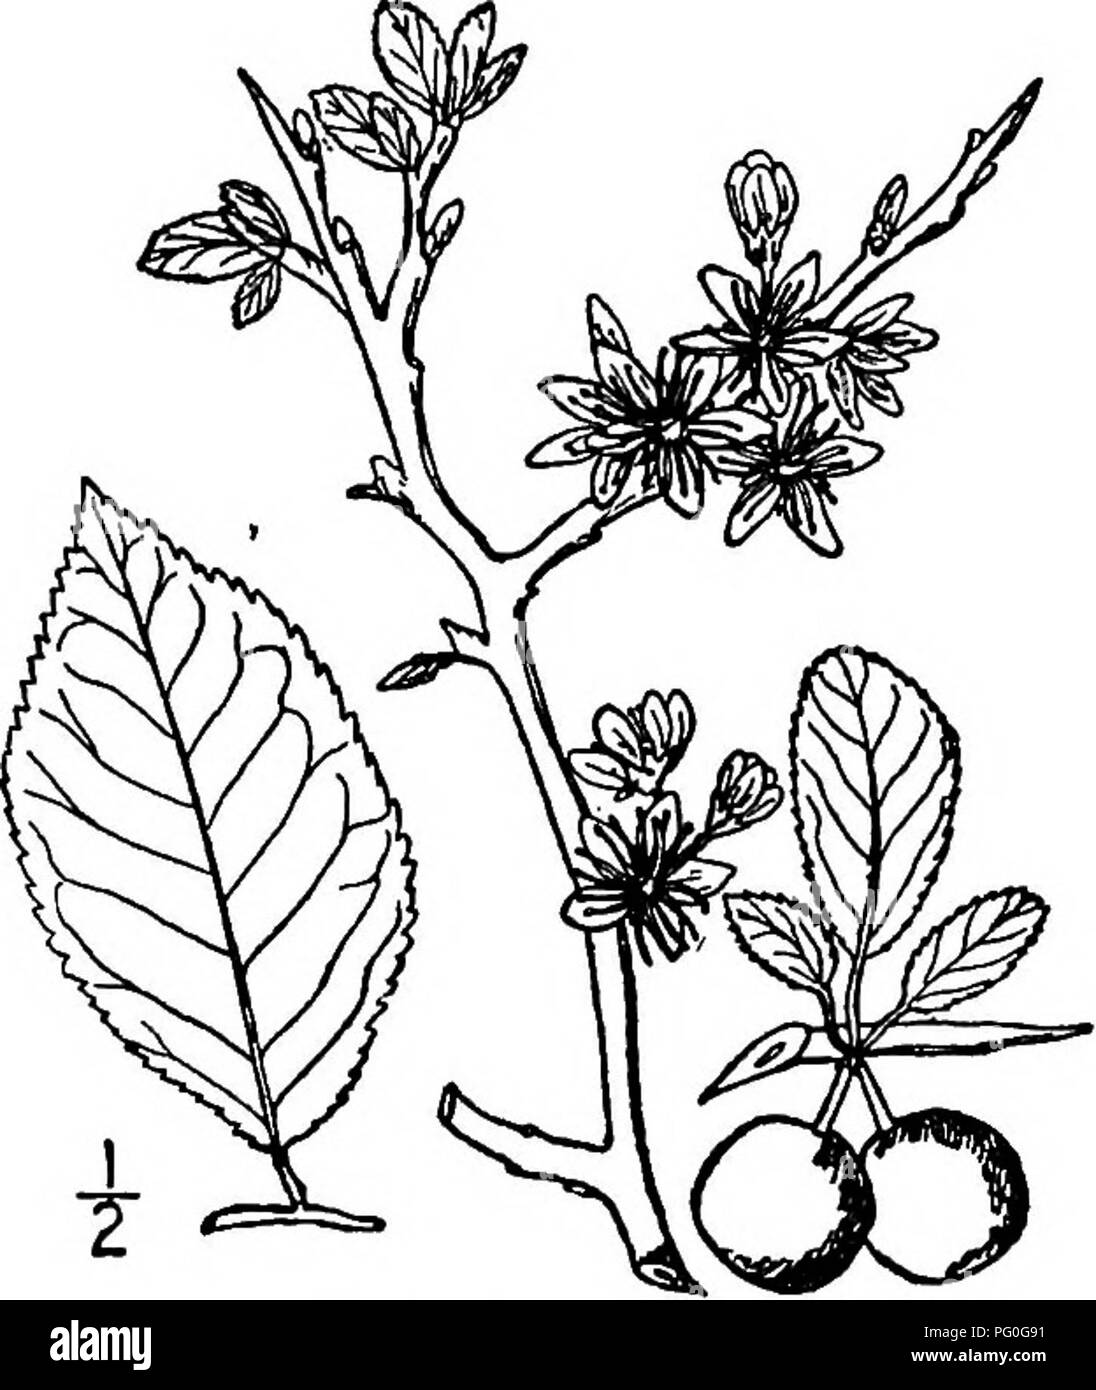 . North American trees : being descriptions and illustrations of the trees growing independently of cultivation in North America, north of Mexico and the West Indies . Trees. Sloe 495 appearing before the leaves in April or May, are 1.5 to 2.5 cm. across, in 3- to 5-flowered umbels on smooth, red pedicels i to 2 cm. long; the calyx-tube is ob- conic, usually red, the lobes lanceolate, glandular-toothed, hairy on the inner surface; the petals are obovate, rounded and irregularly erose, white, fading to pink. The fruit, ripening in August or September, is oval or subglobose, 2.5 to 3 cm. long, o Stock Photo